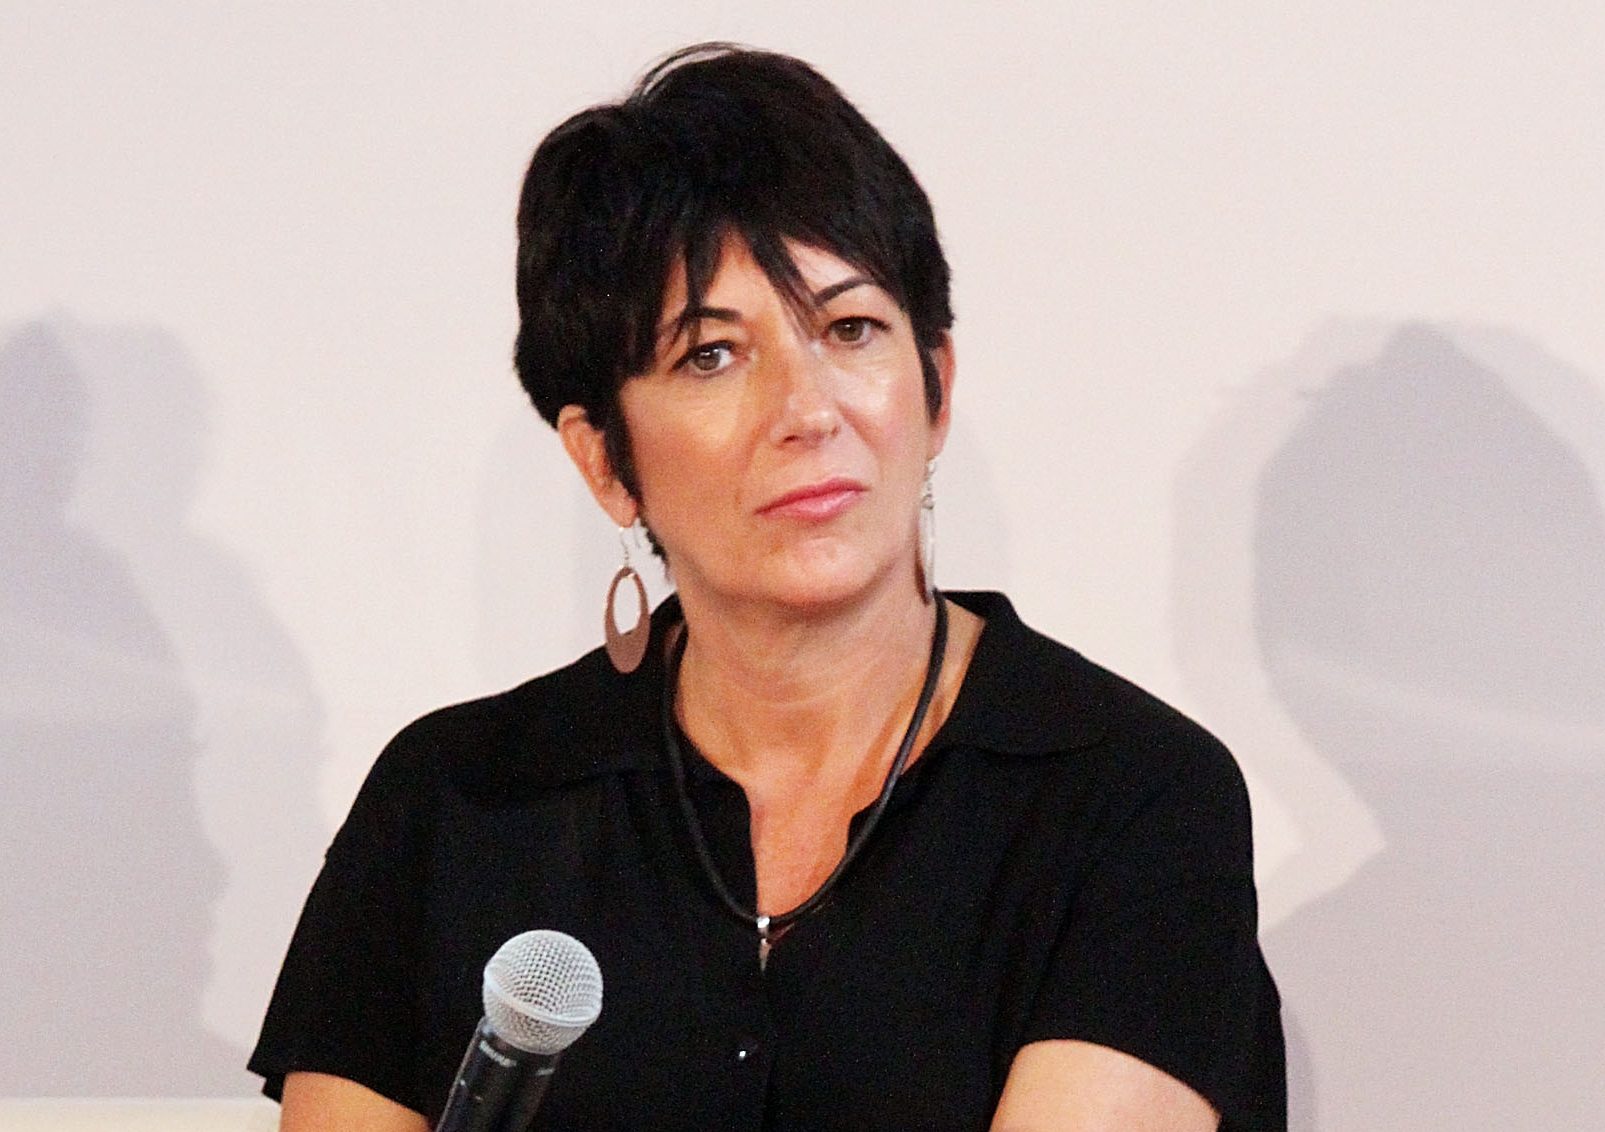 Ghislaine Maxwell, Jeffrey Epsteins ex, faces added sex trafficking charges